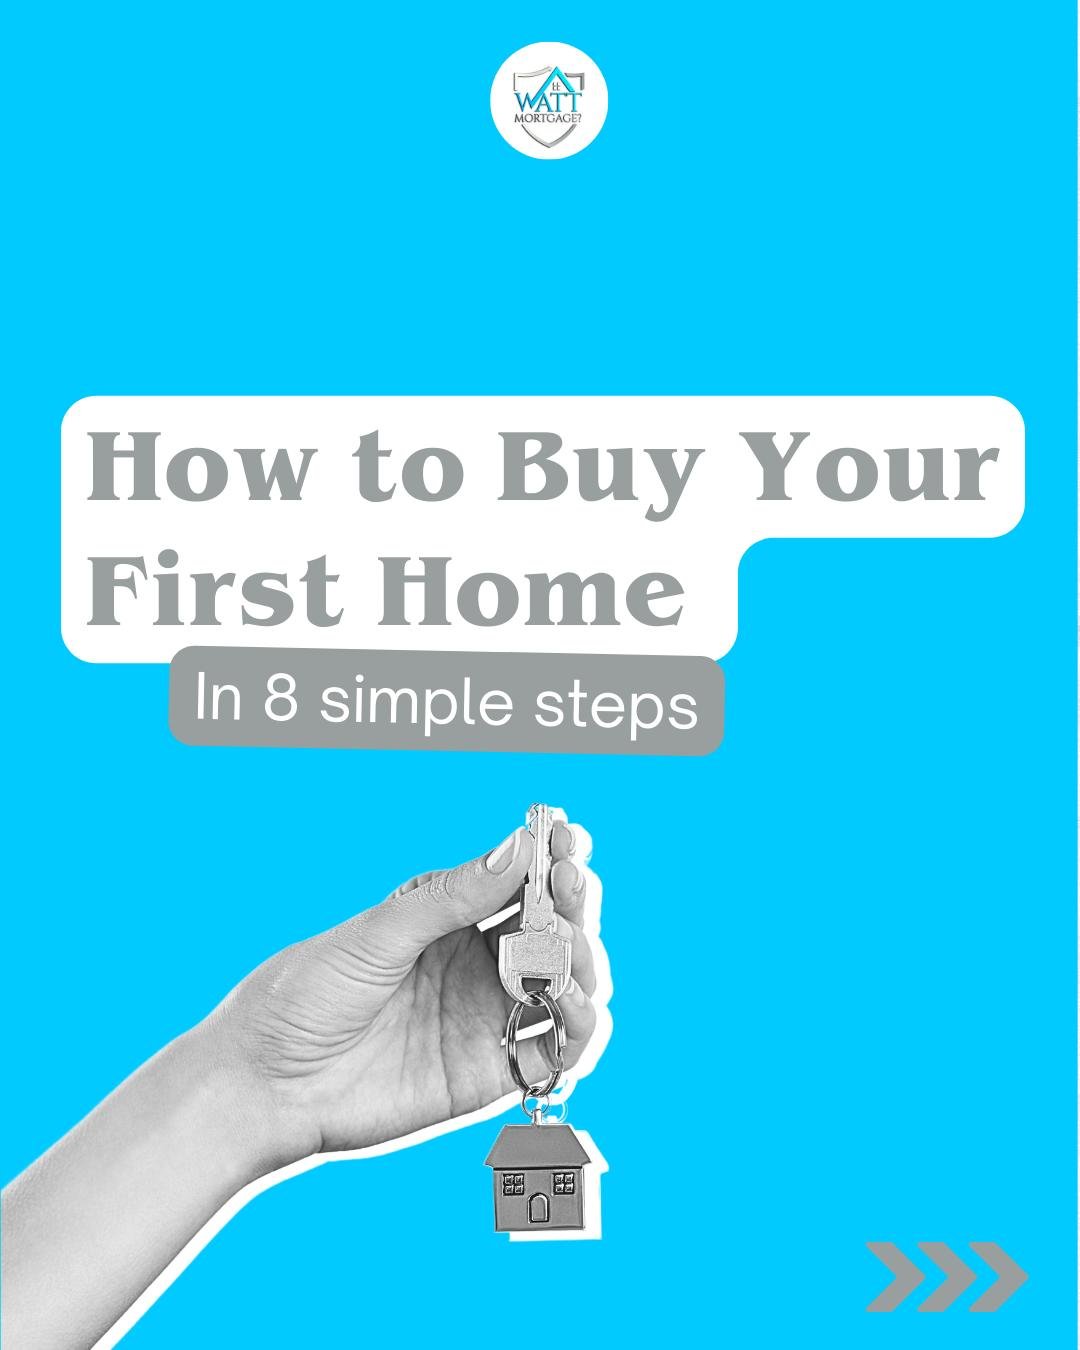 How to Buy Your First Home...🏡

Buying your first home can be a daunting process. We have broken down the process into 8 simple steps...

💰Budget setting: Determine how much you can afford to spend on your new home. This involves calculating your d